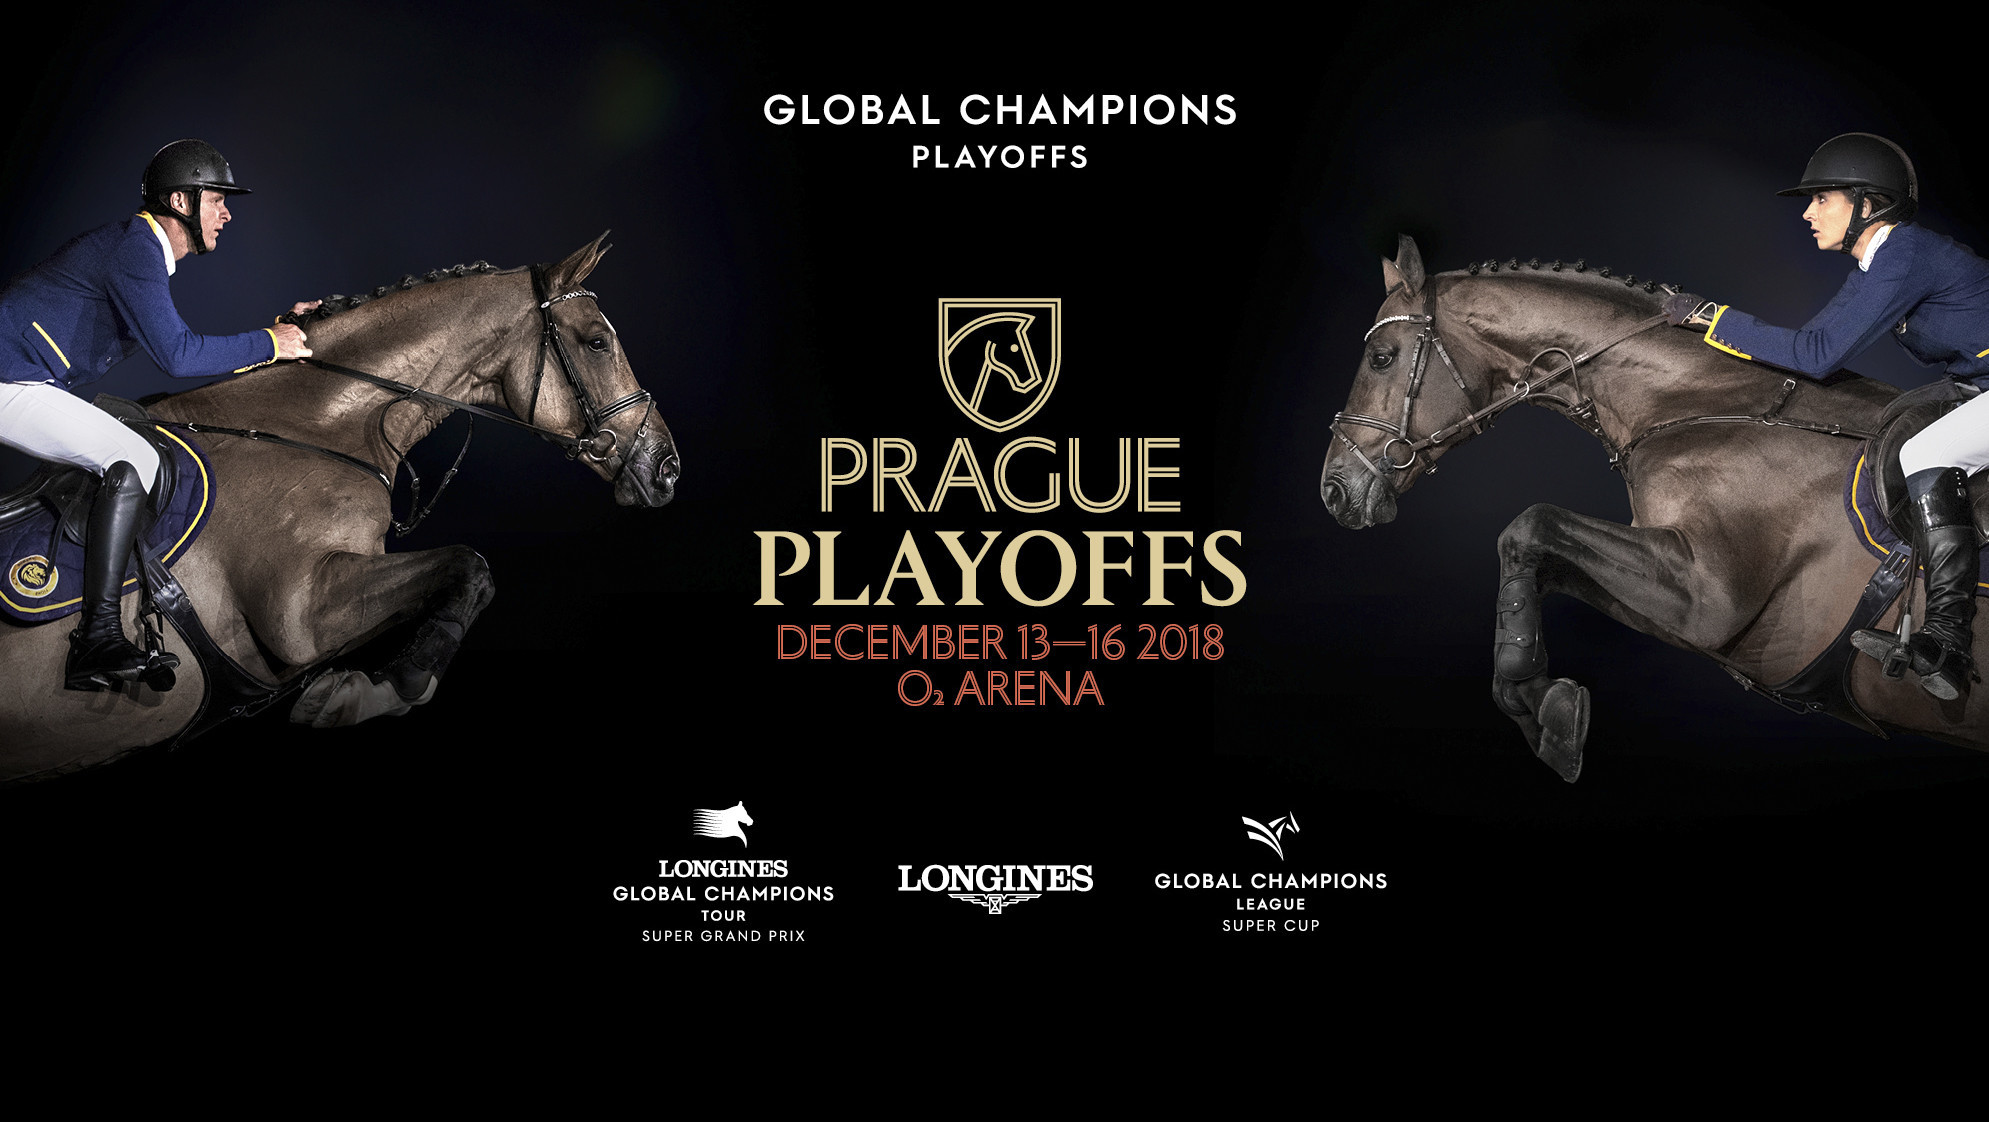 The world's top showjumpers have gathered in Prague for a new end-of-year event at the end of the Longines Global Champions Tour ©GCT